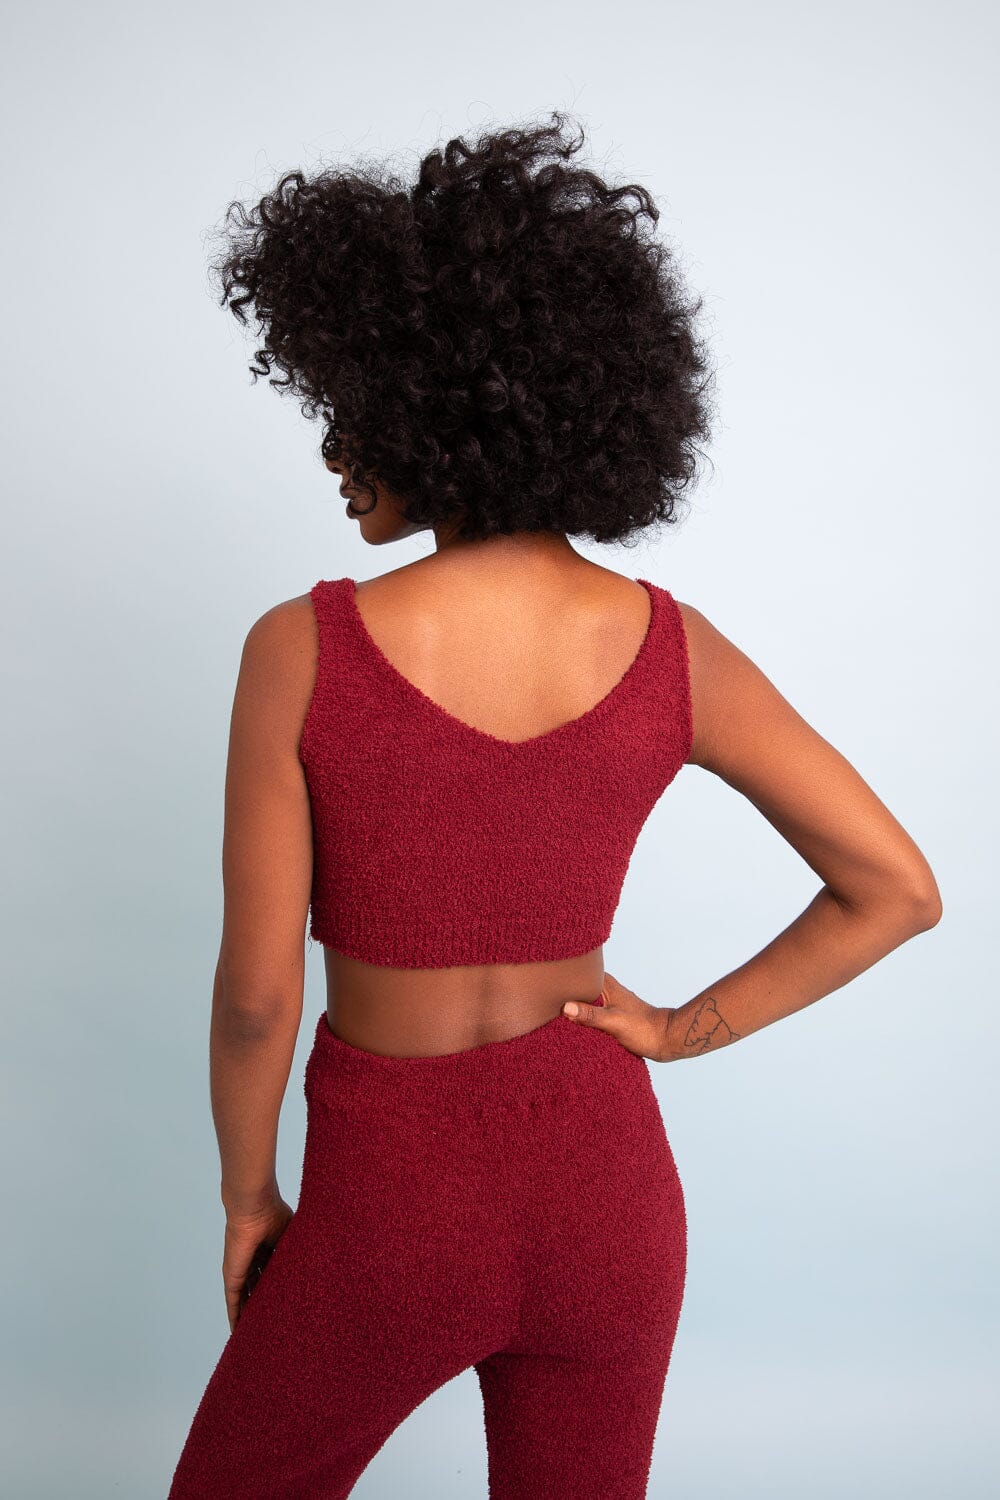 Cuddle Season Boucle Soft Brami Top Leto Collection XS/S Maroon 